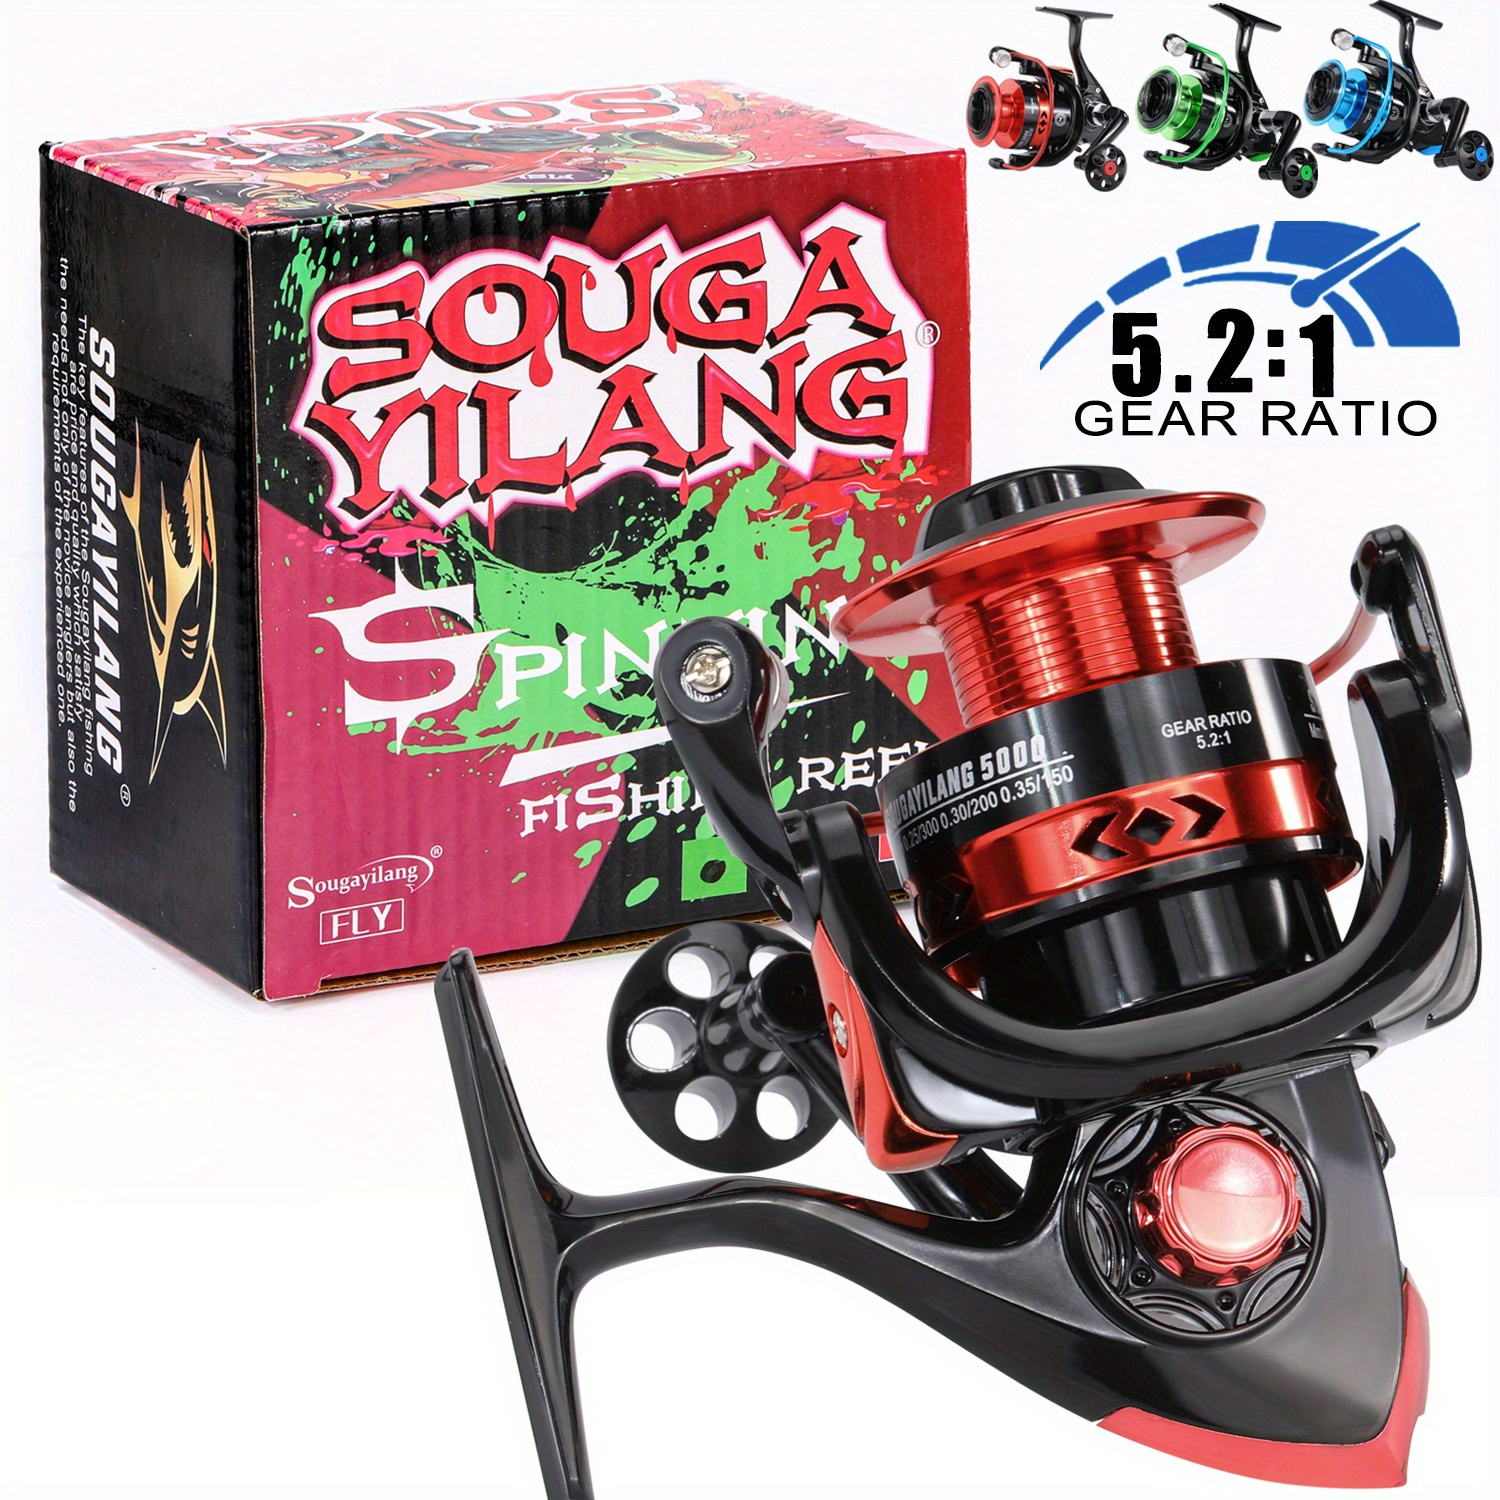 Sougayilang Spinning Fishing Reels with Left/Right India | Ubuy